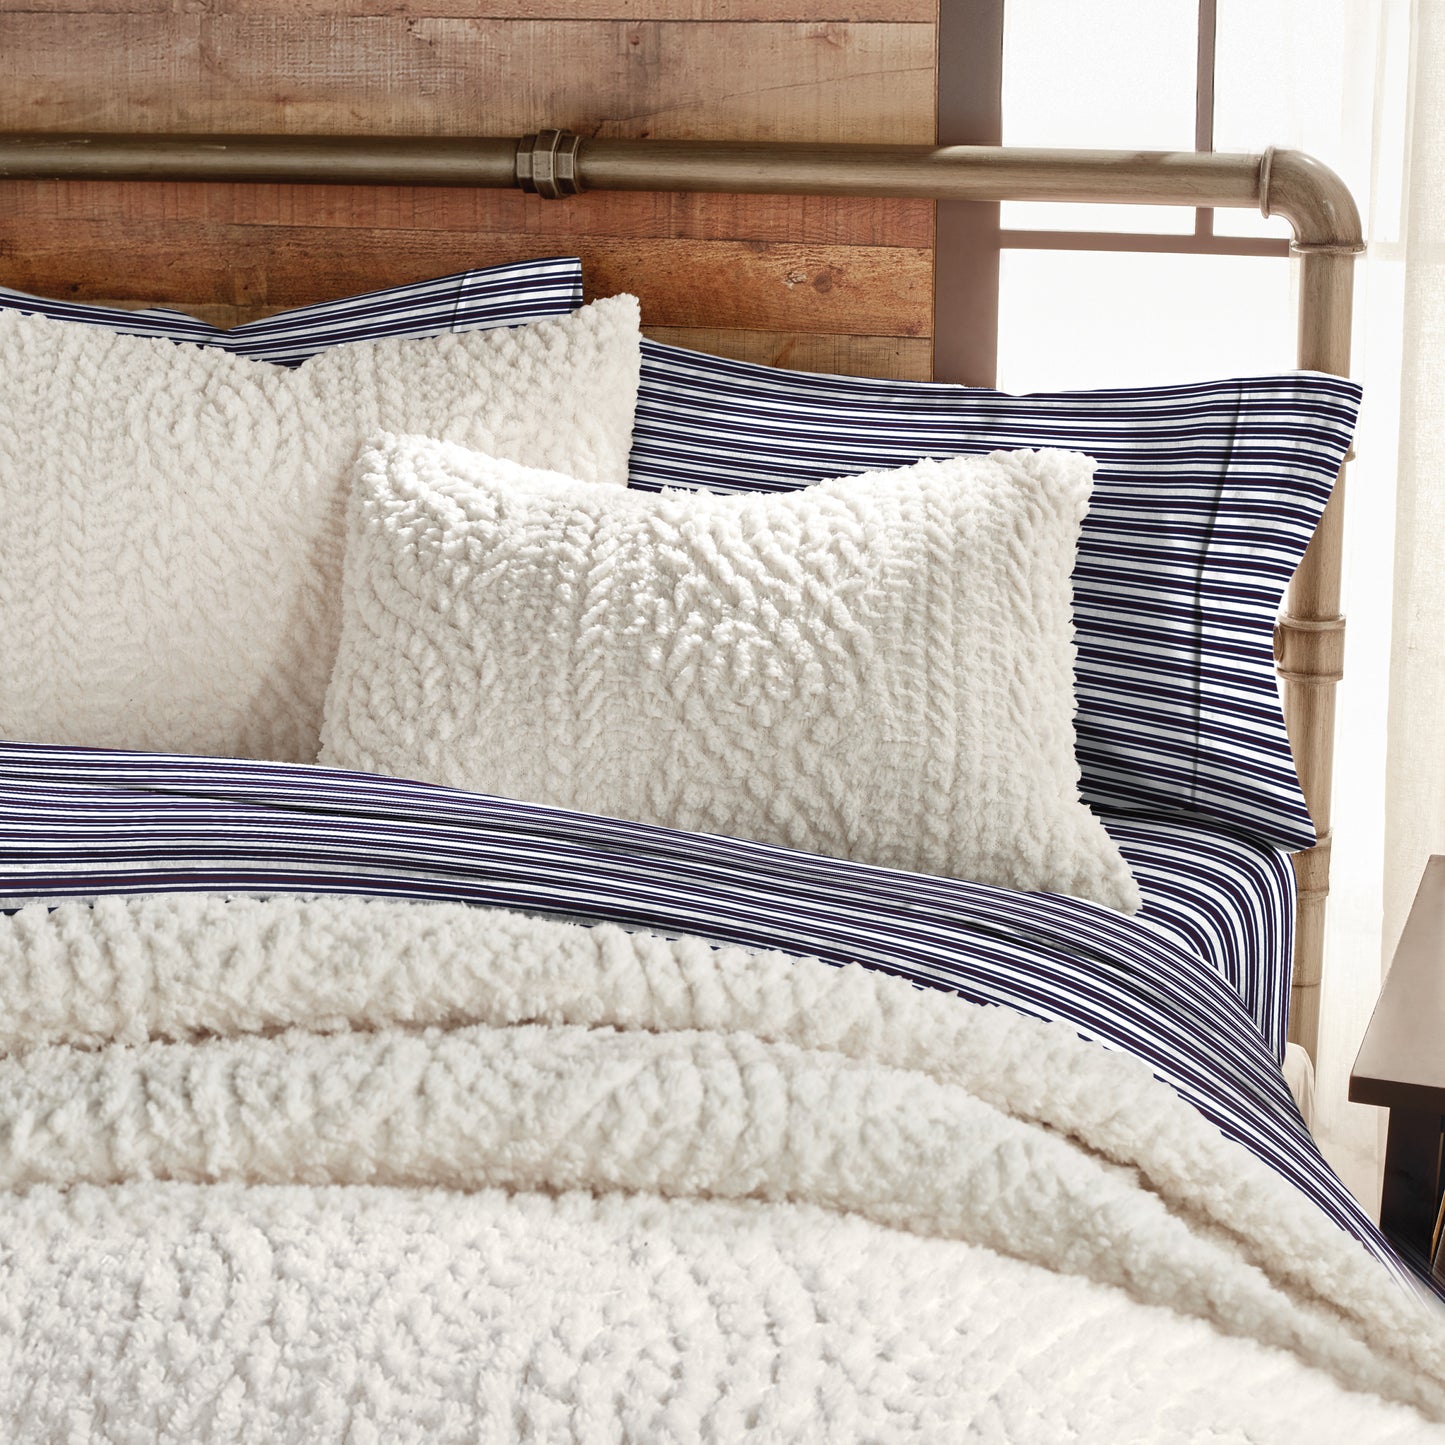 G.H. Bass & Co. Cable Knit Sherpa Bedding Comforter Set